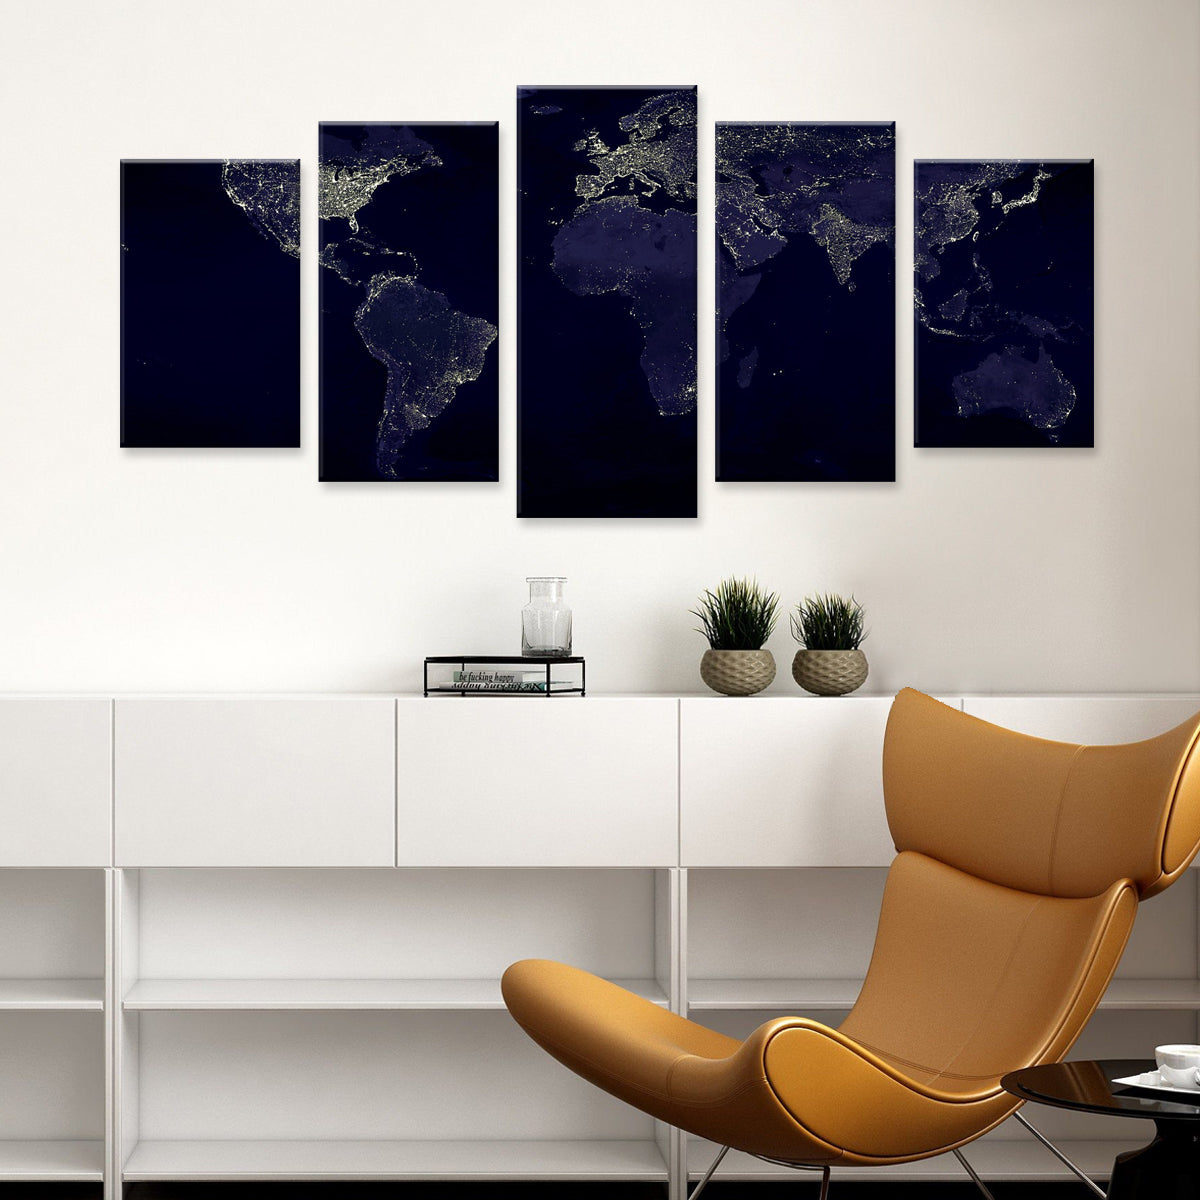 World Map in Blue